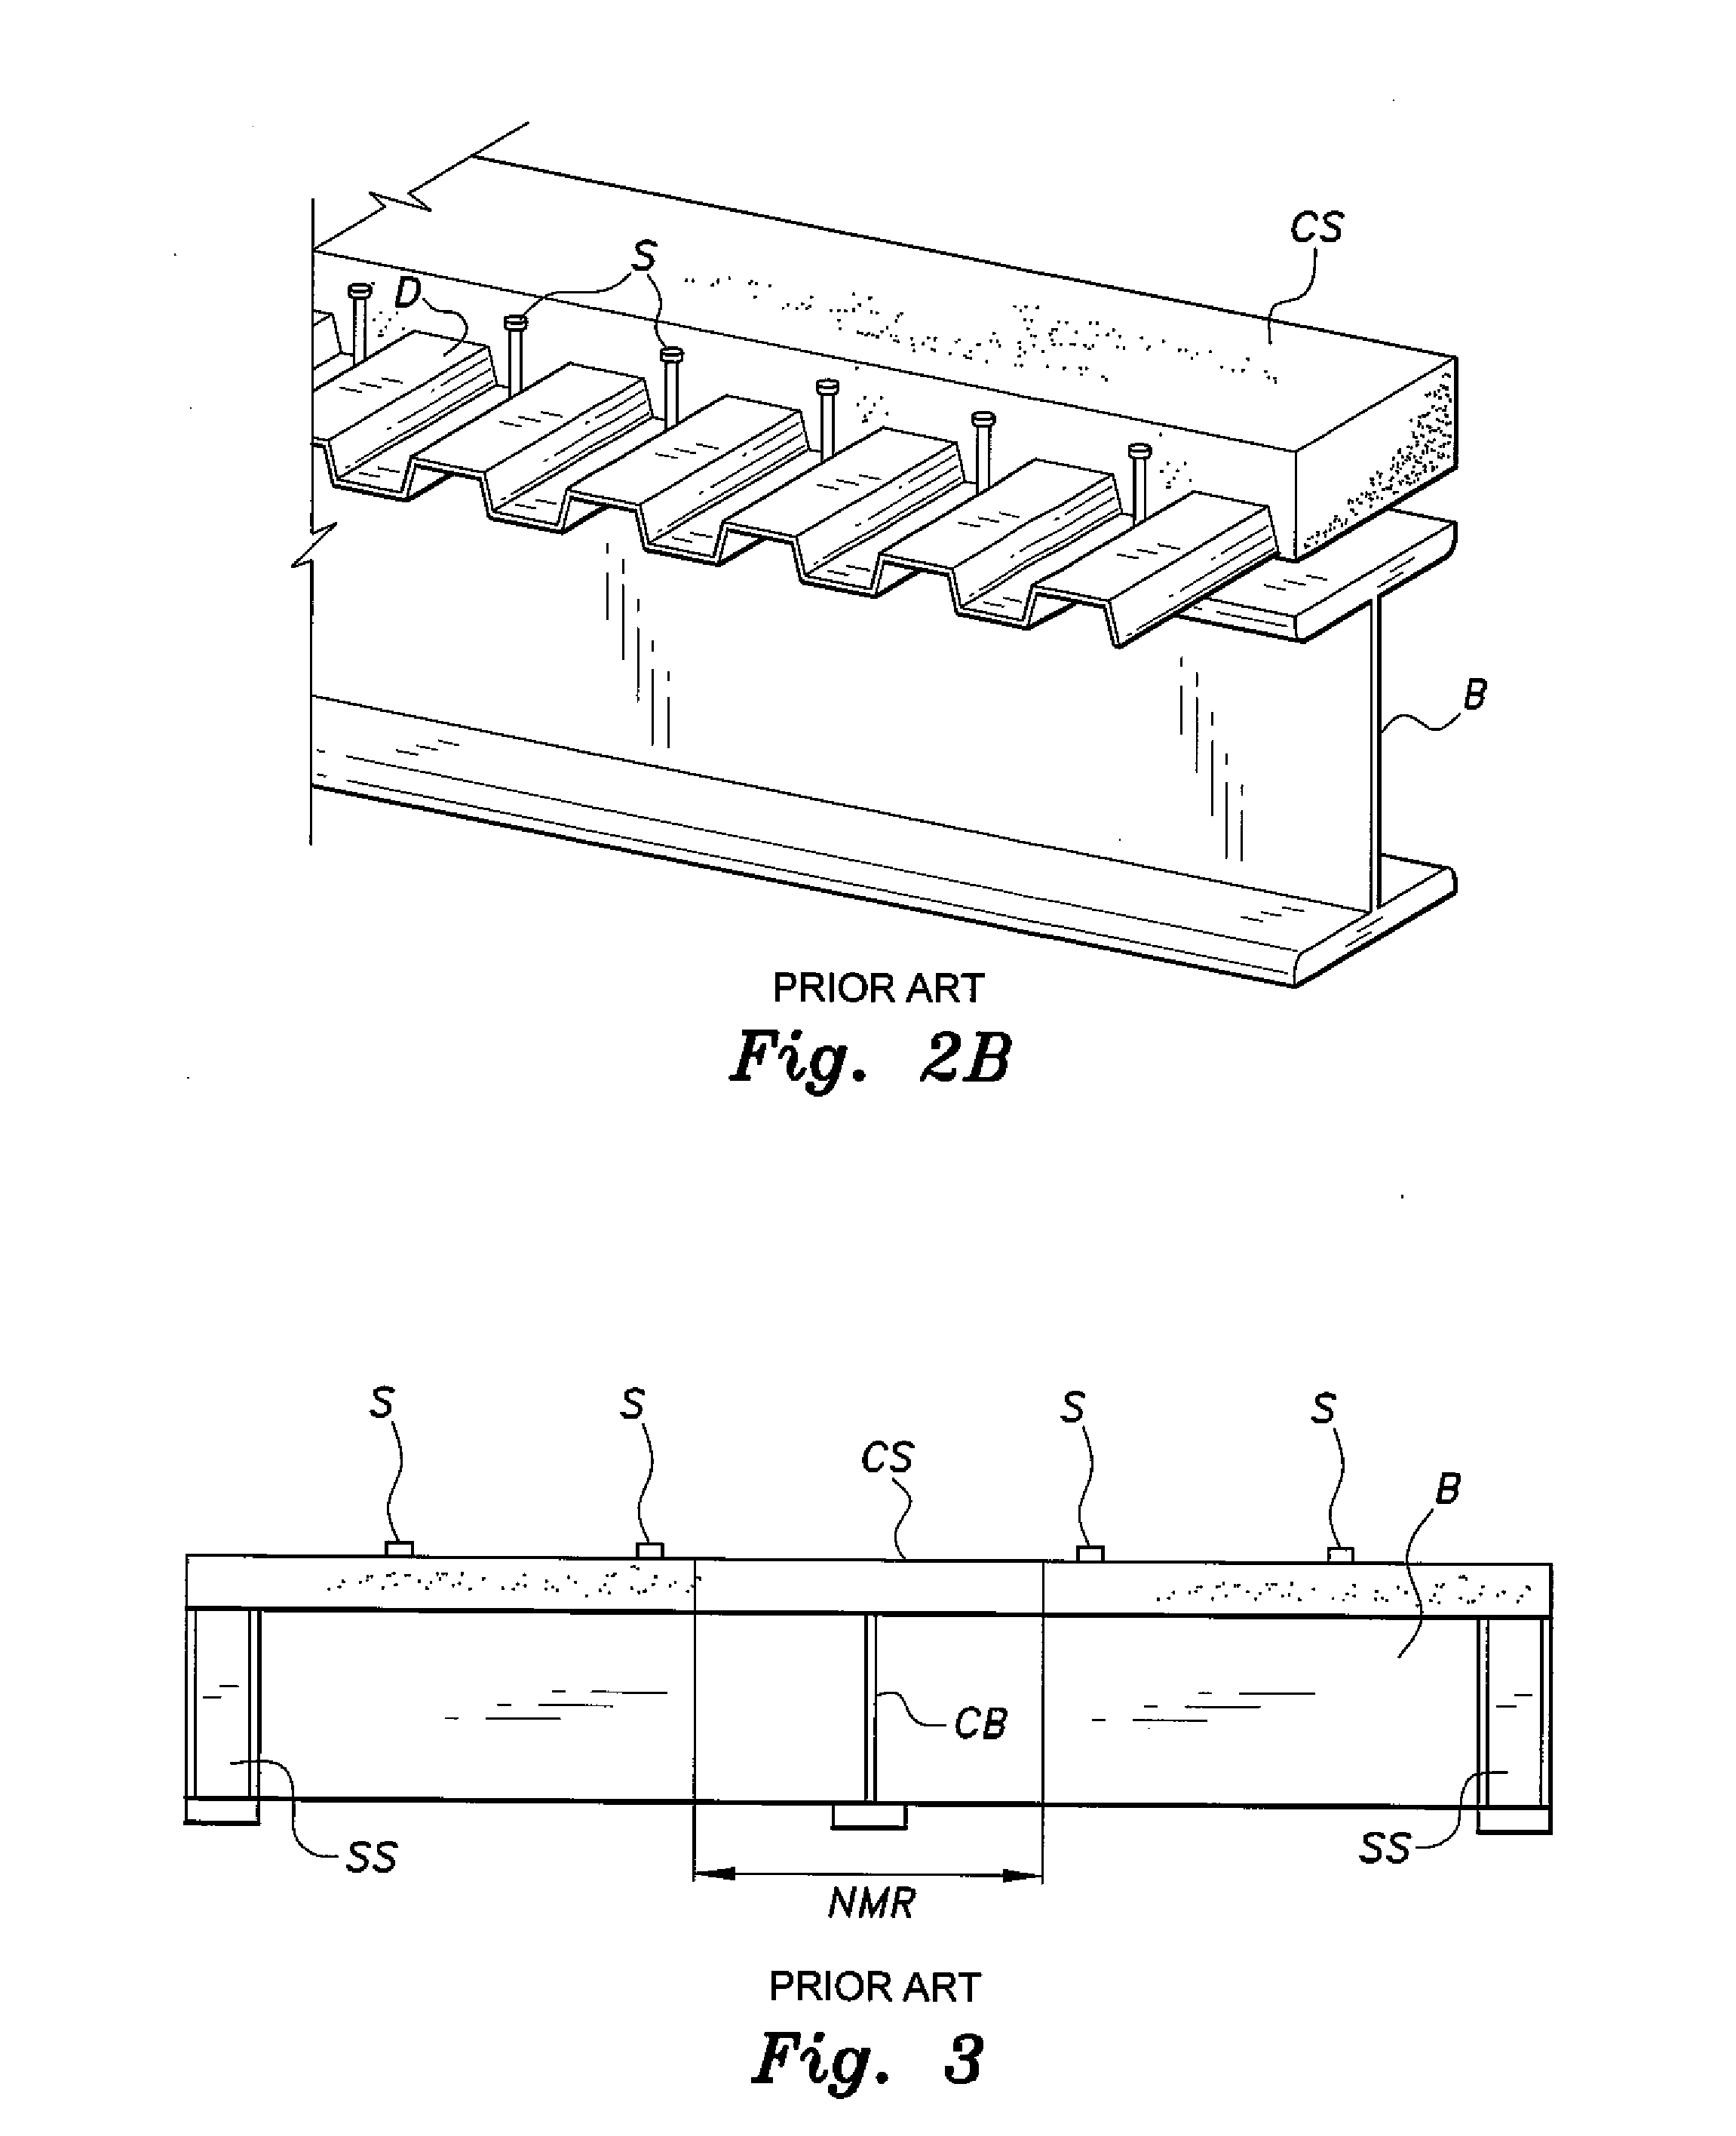 Composite girder partially reinforced with carbon fiber reinforced polymer